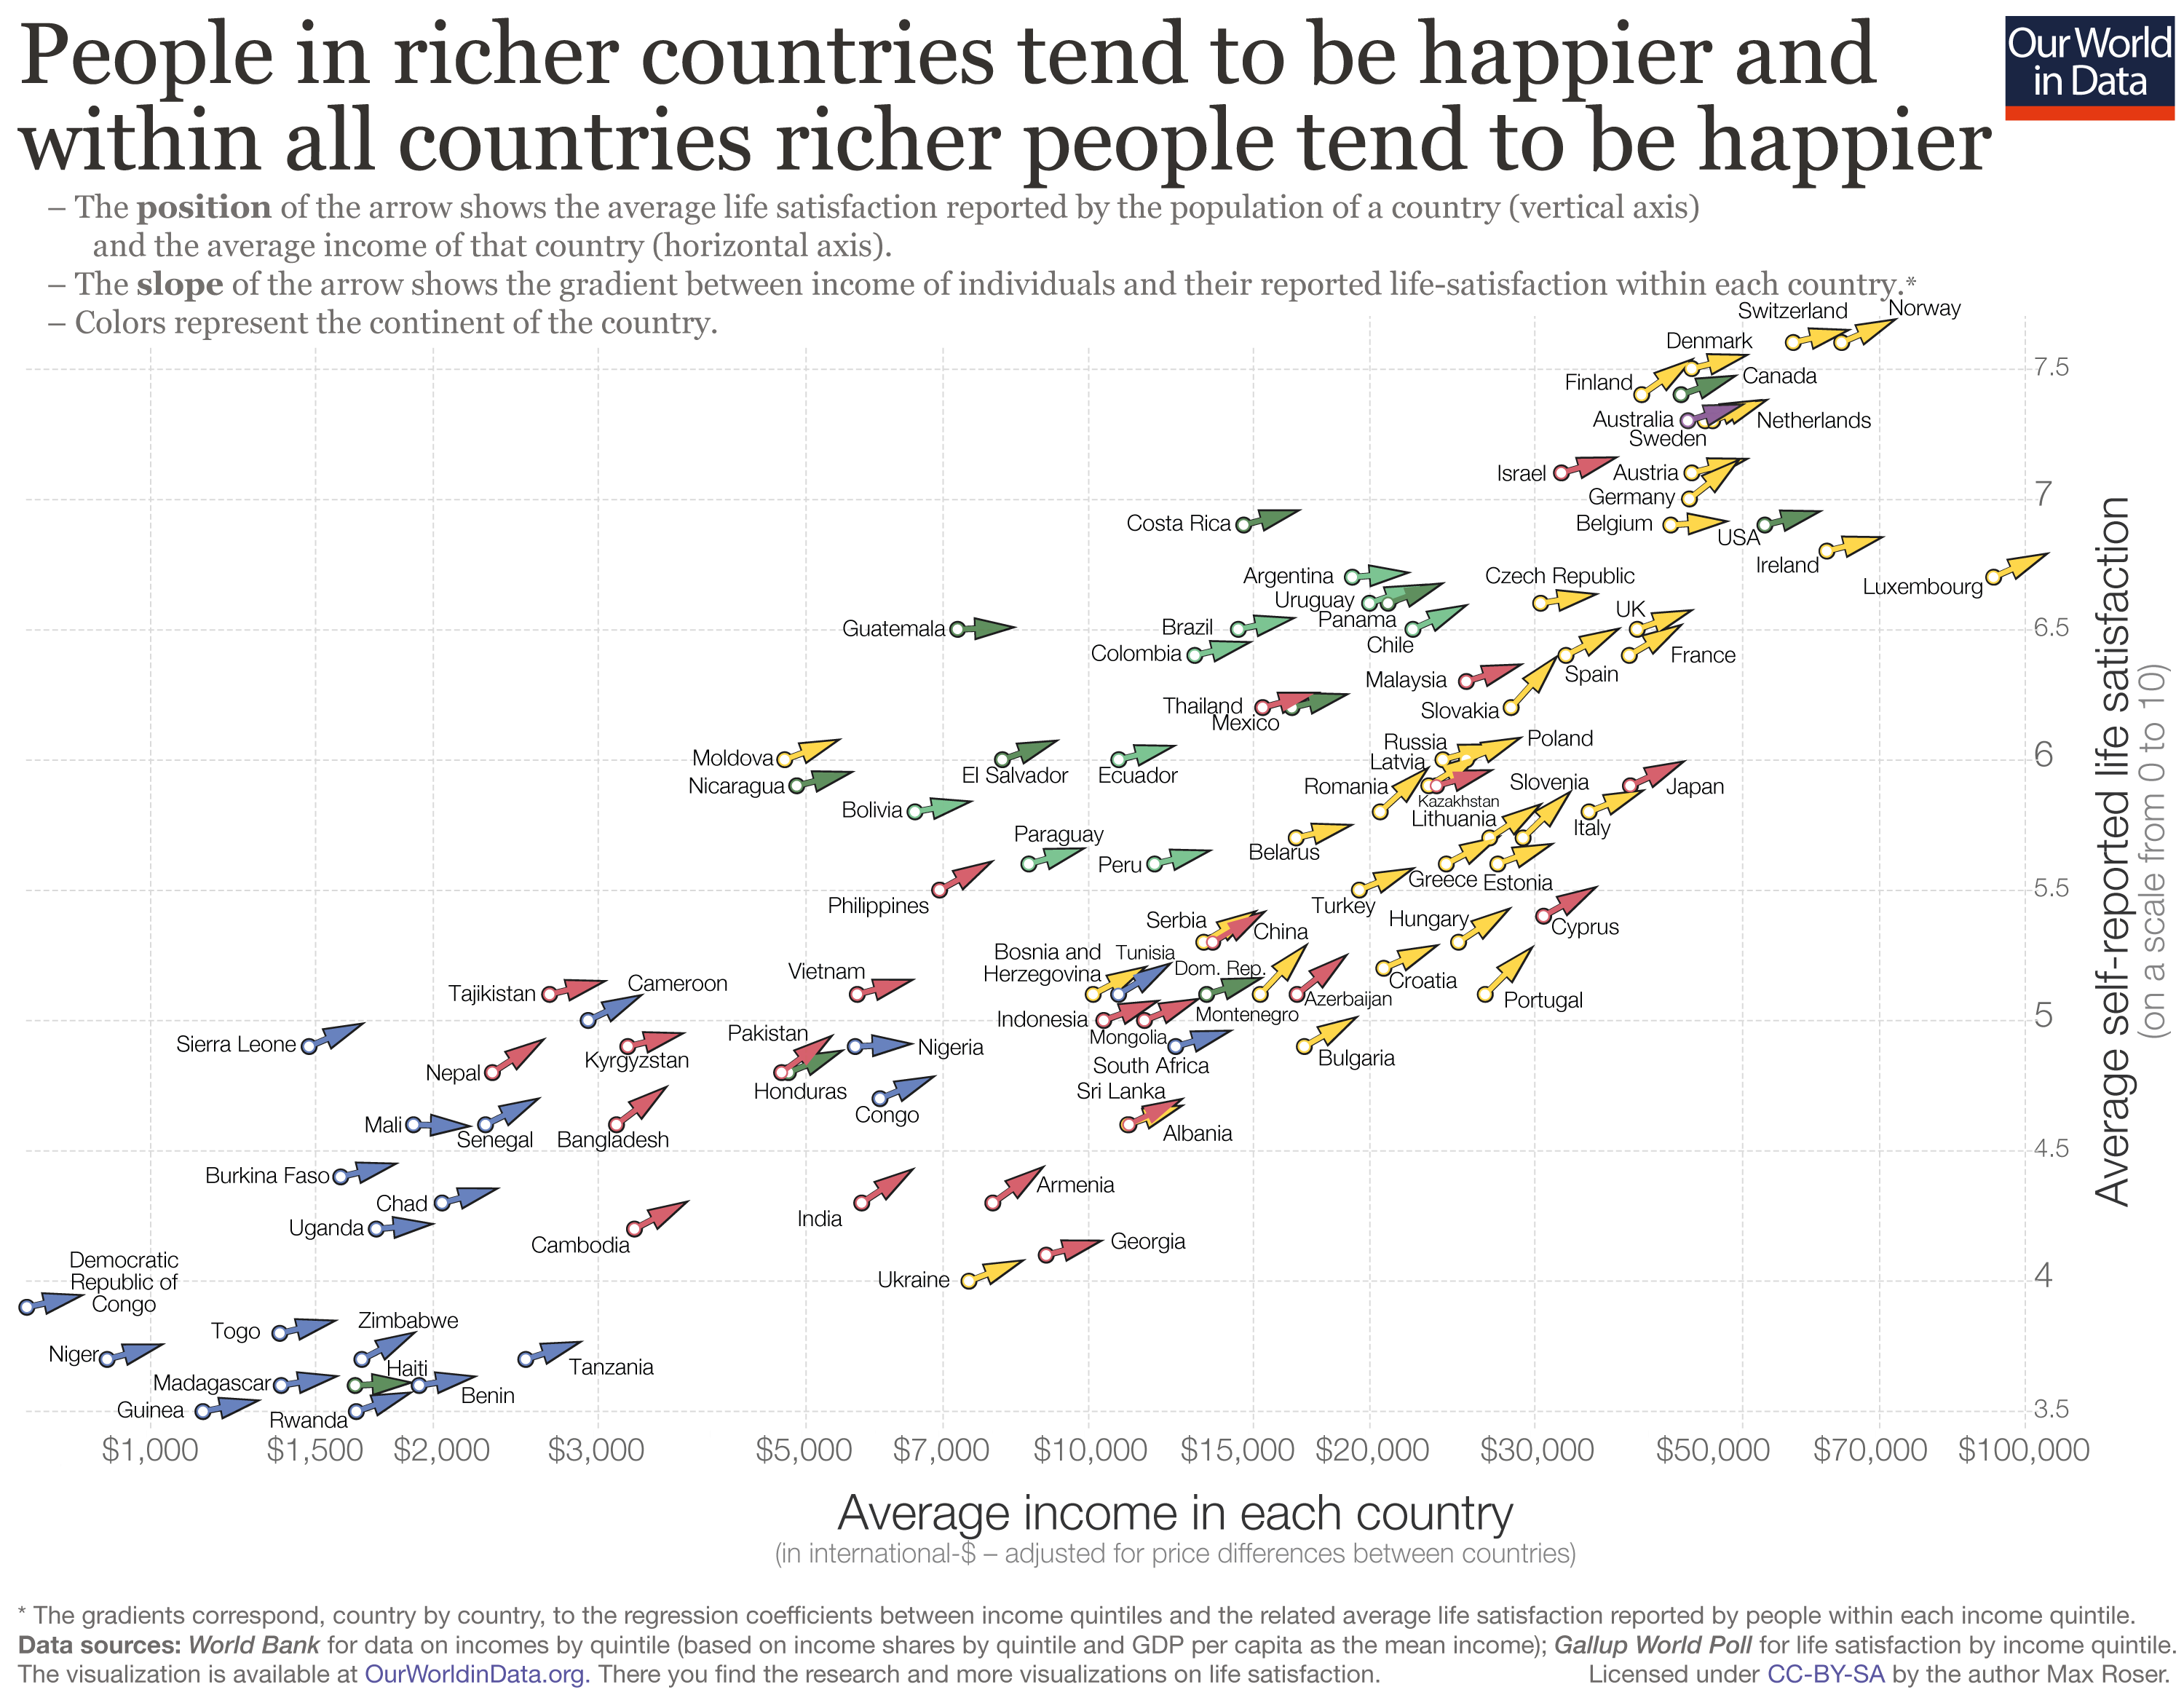 People in richer countries tend to be happier, and within all countries, richer people tend to be happier